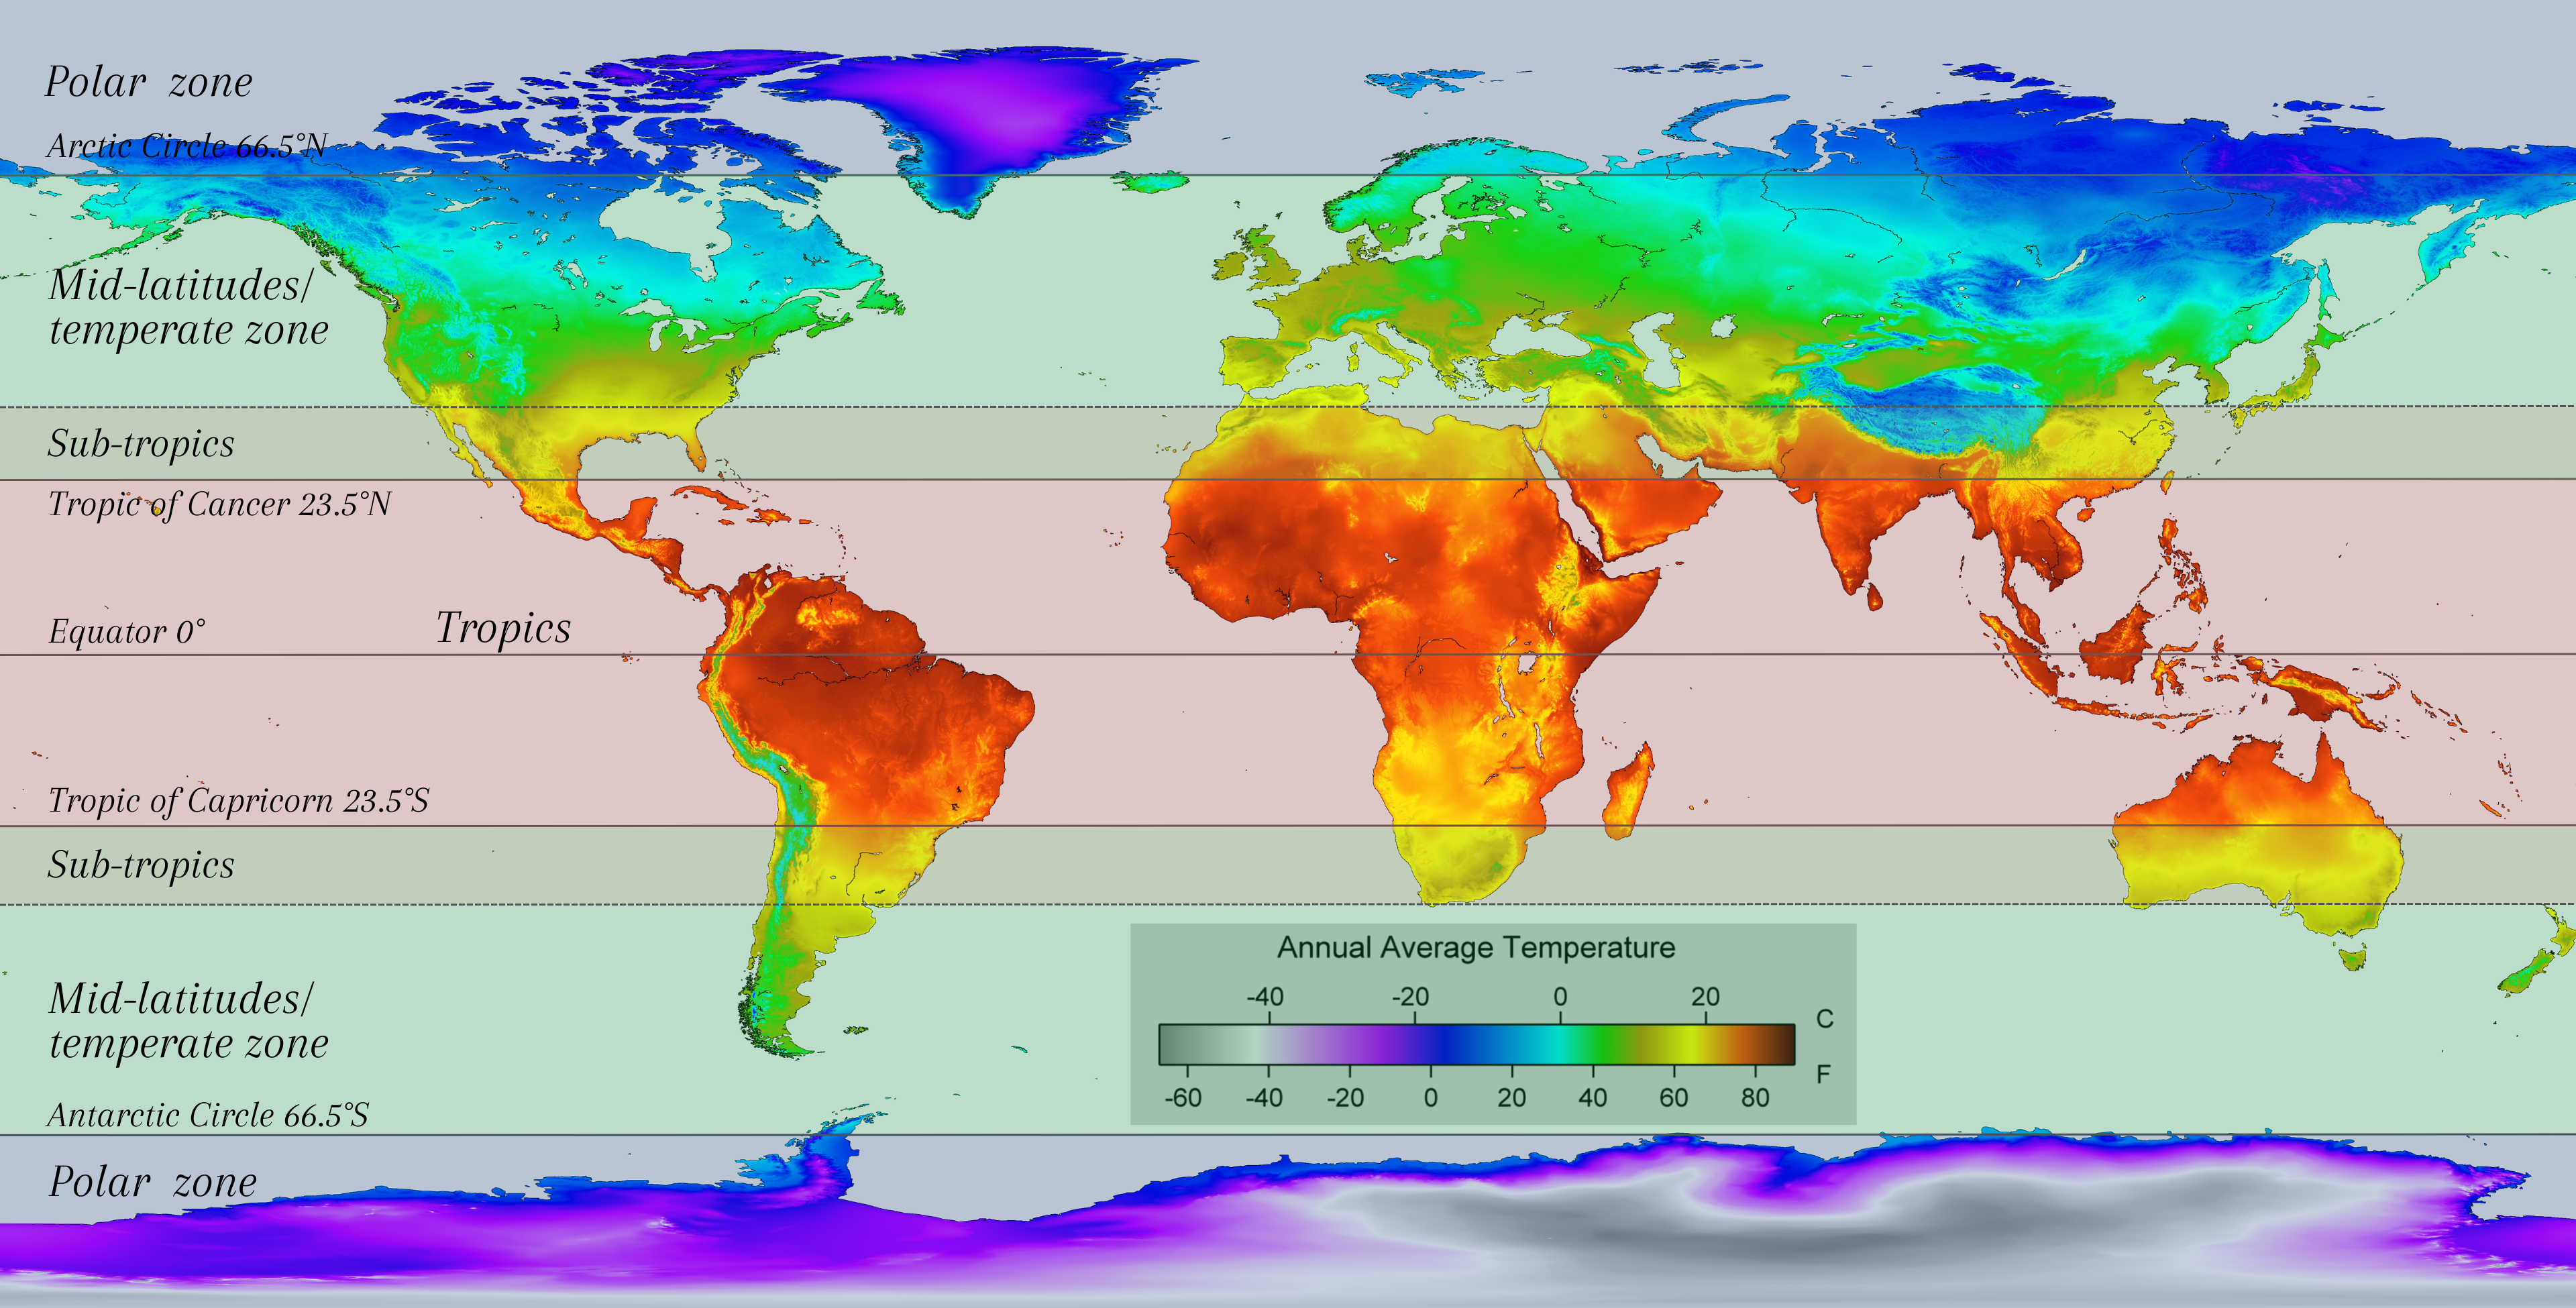 Seven latitudinal zones with temperatures warmest in the Tropics and coldest in the Polar zones